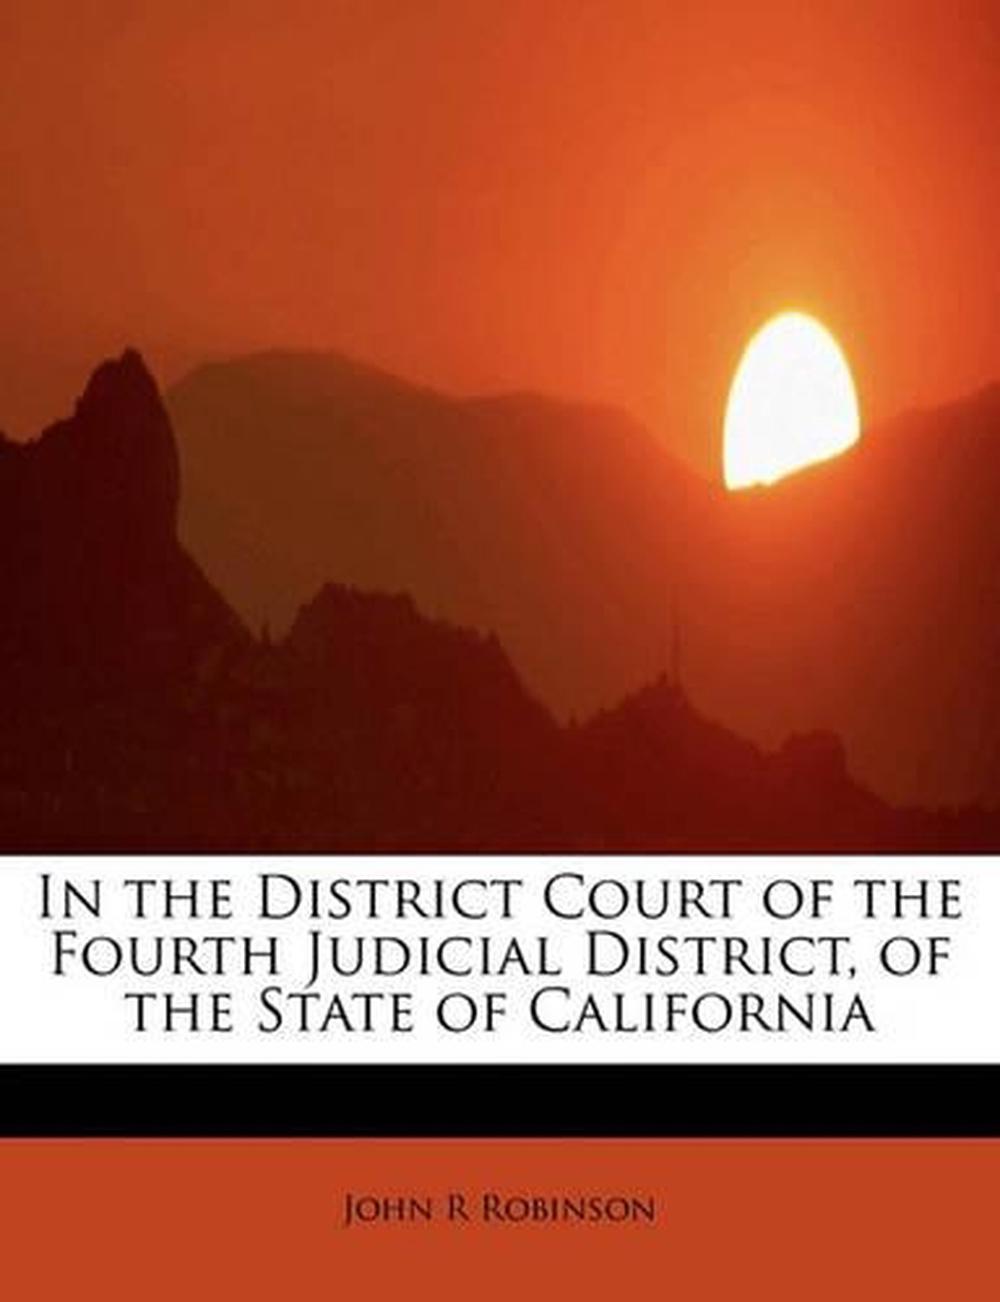 In the District Court of the Fourth Judicial District of the State of